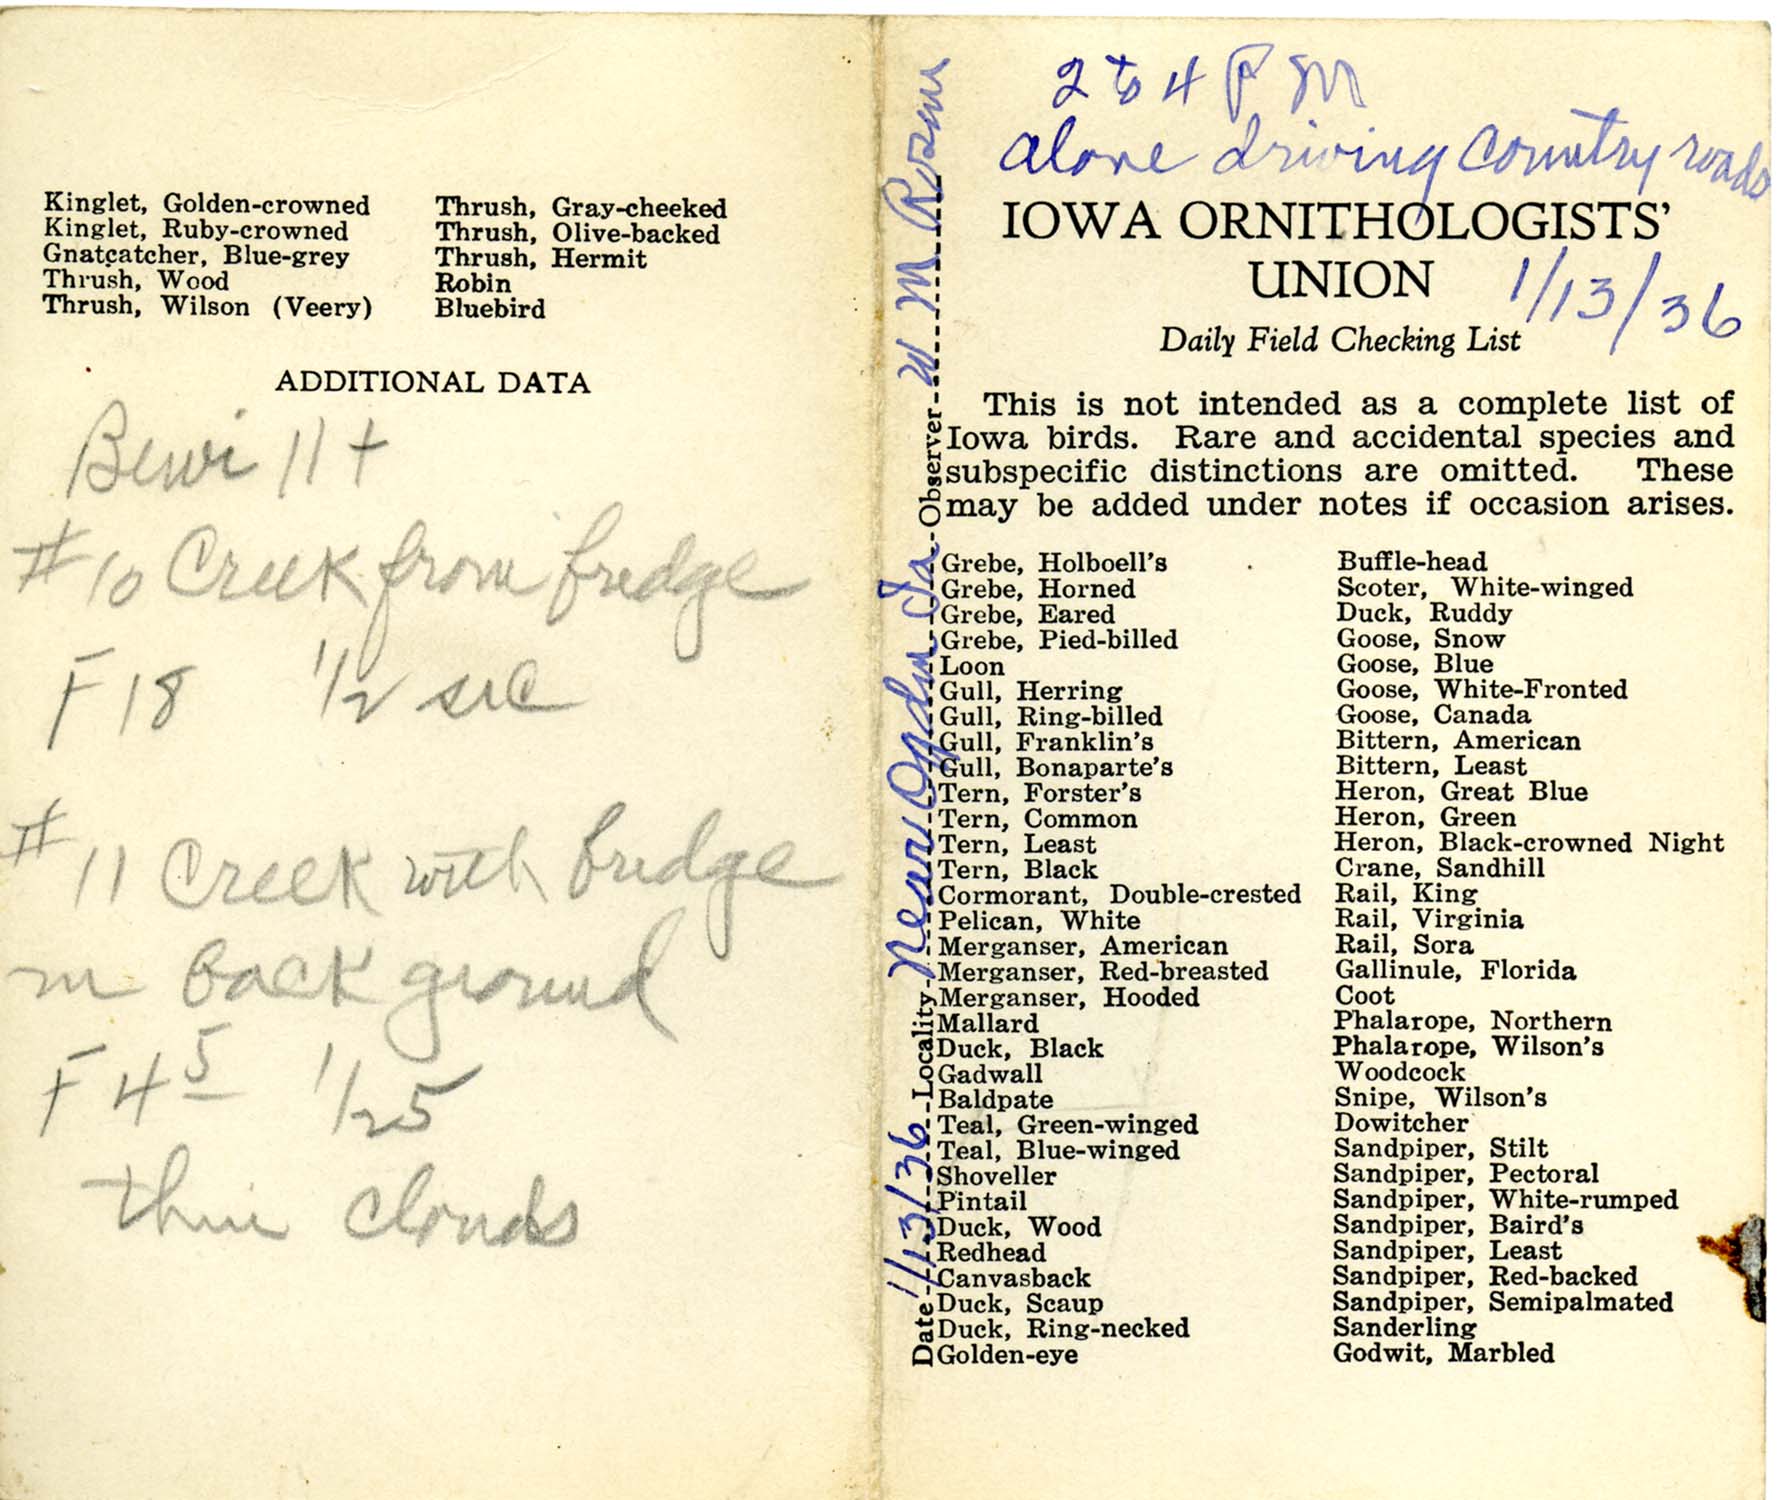 Daily field checking list by Walter Rosene, January 13, 1936